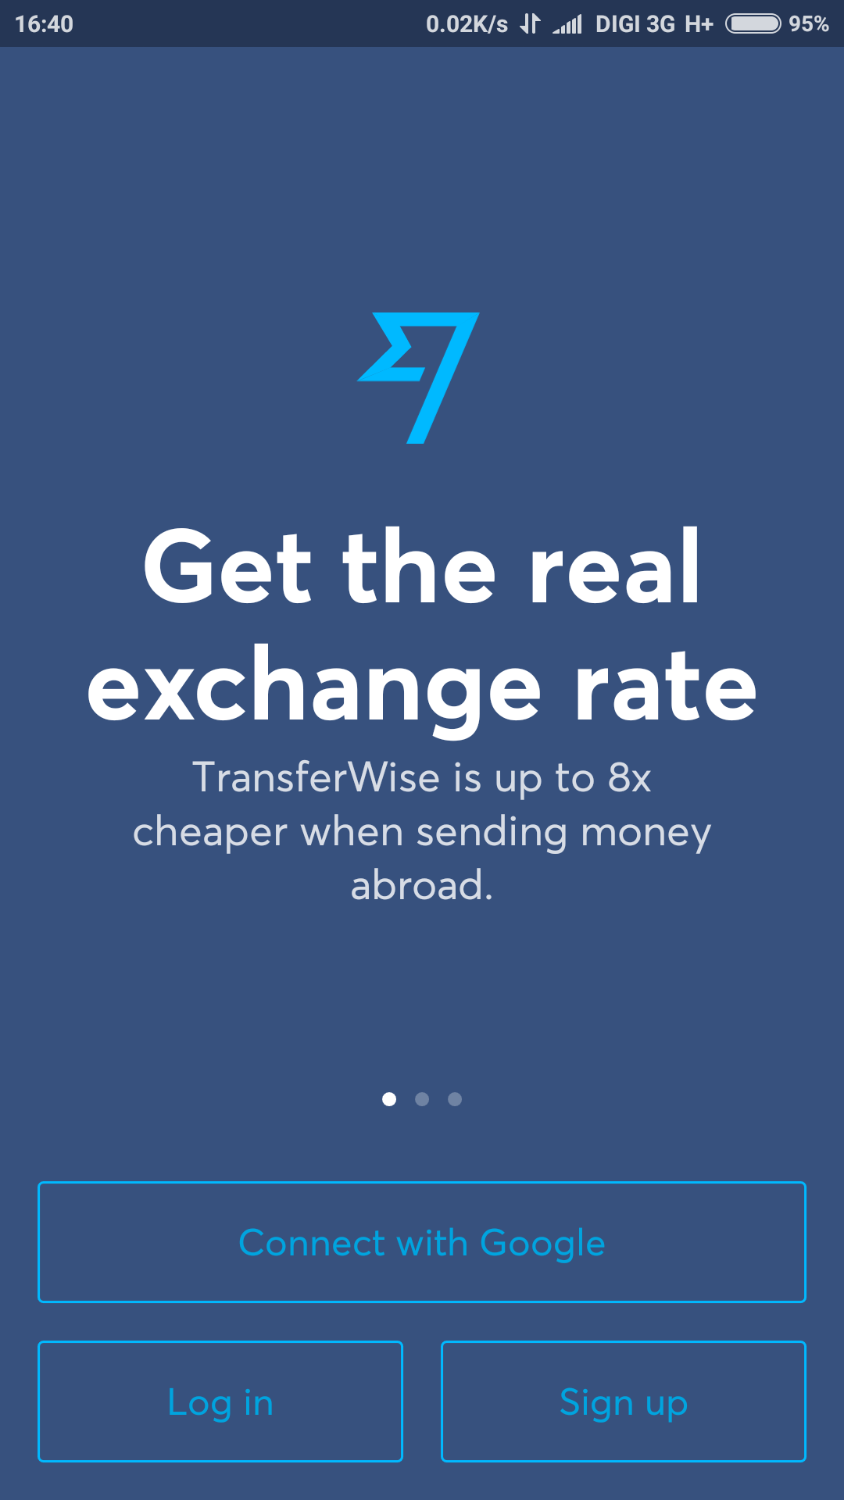 Screenshot_2018-02-28-16-40-01-591_com.transferwise.android.png